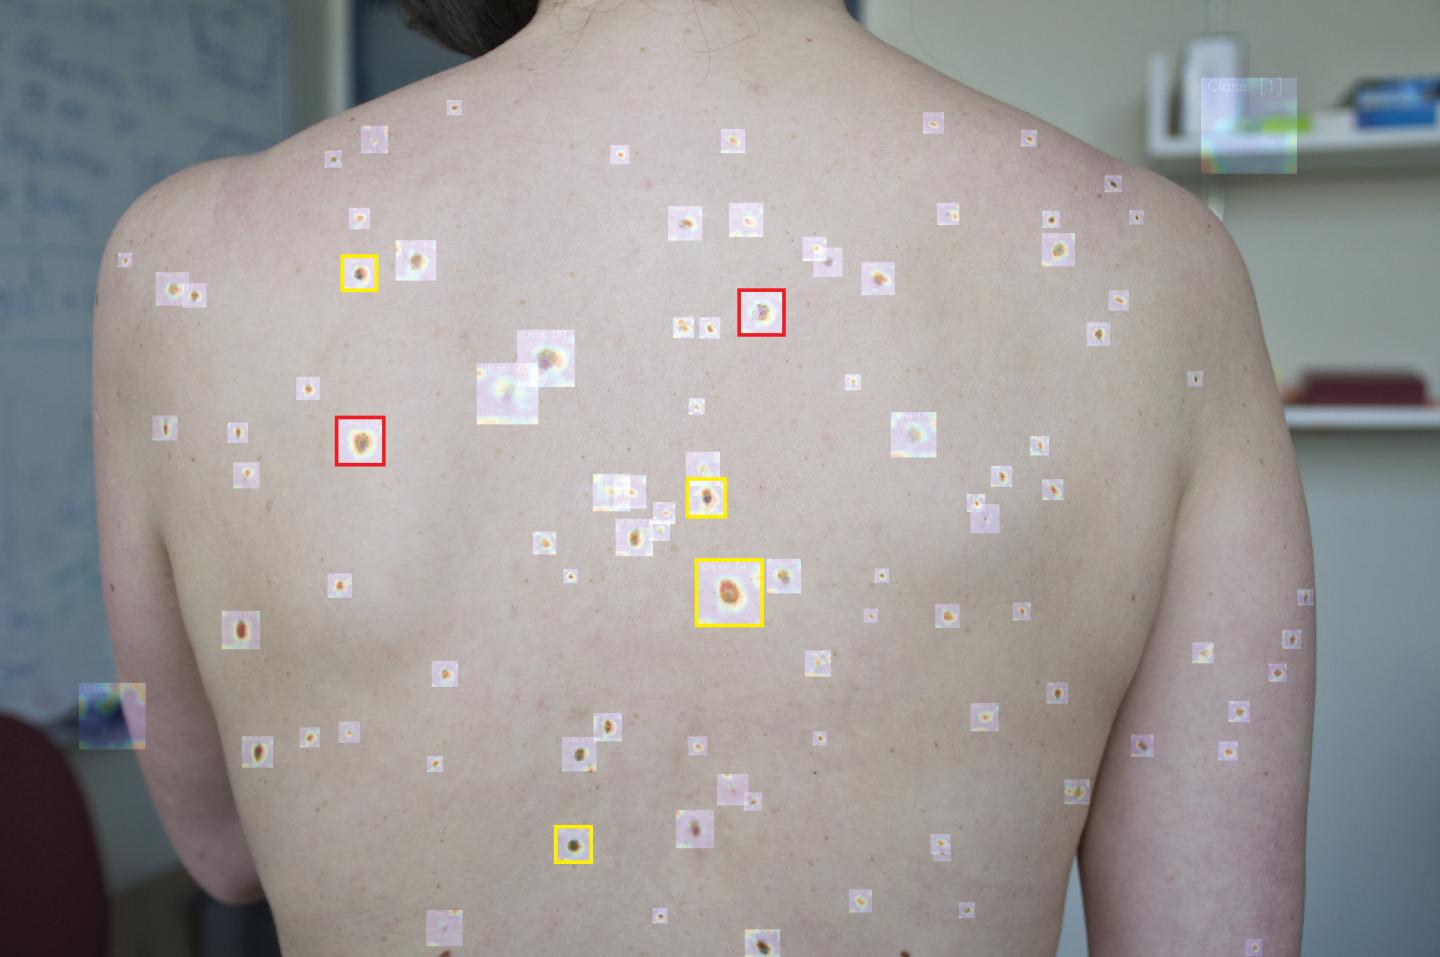 Neural Network Could Help Clinicians Look for "Ugly Duckling" Pre-Cancerous Skin Lesions (3 of 5)